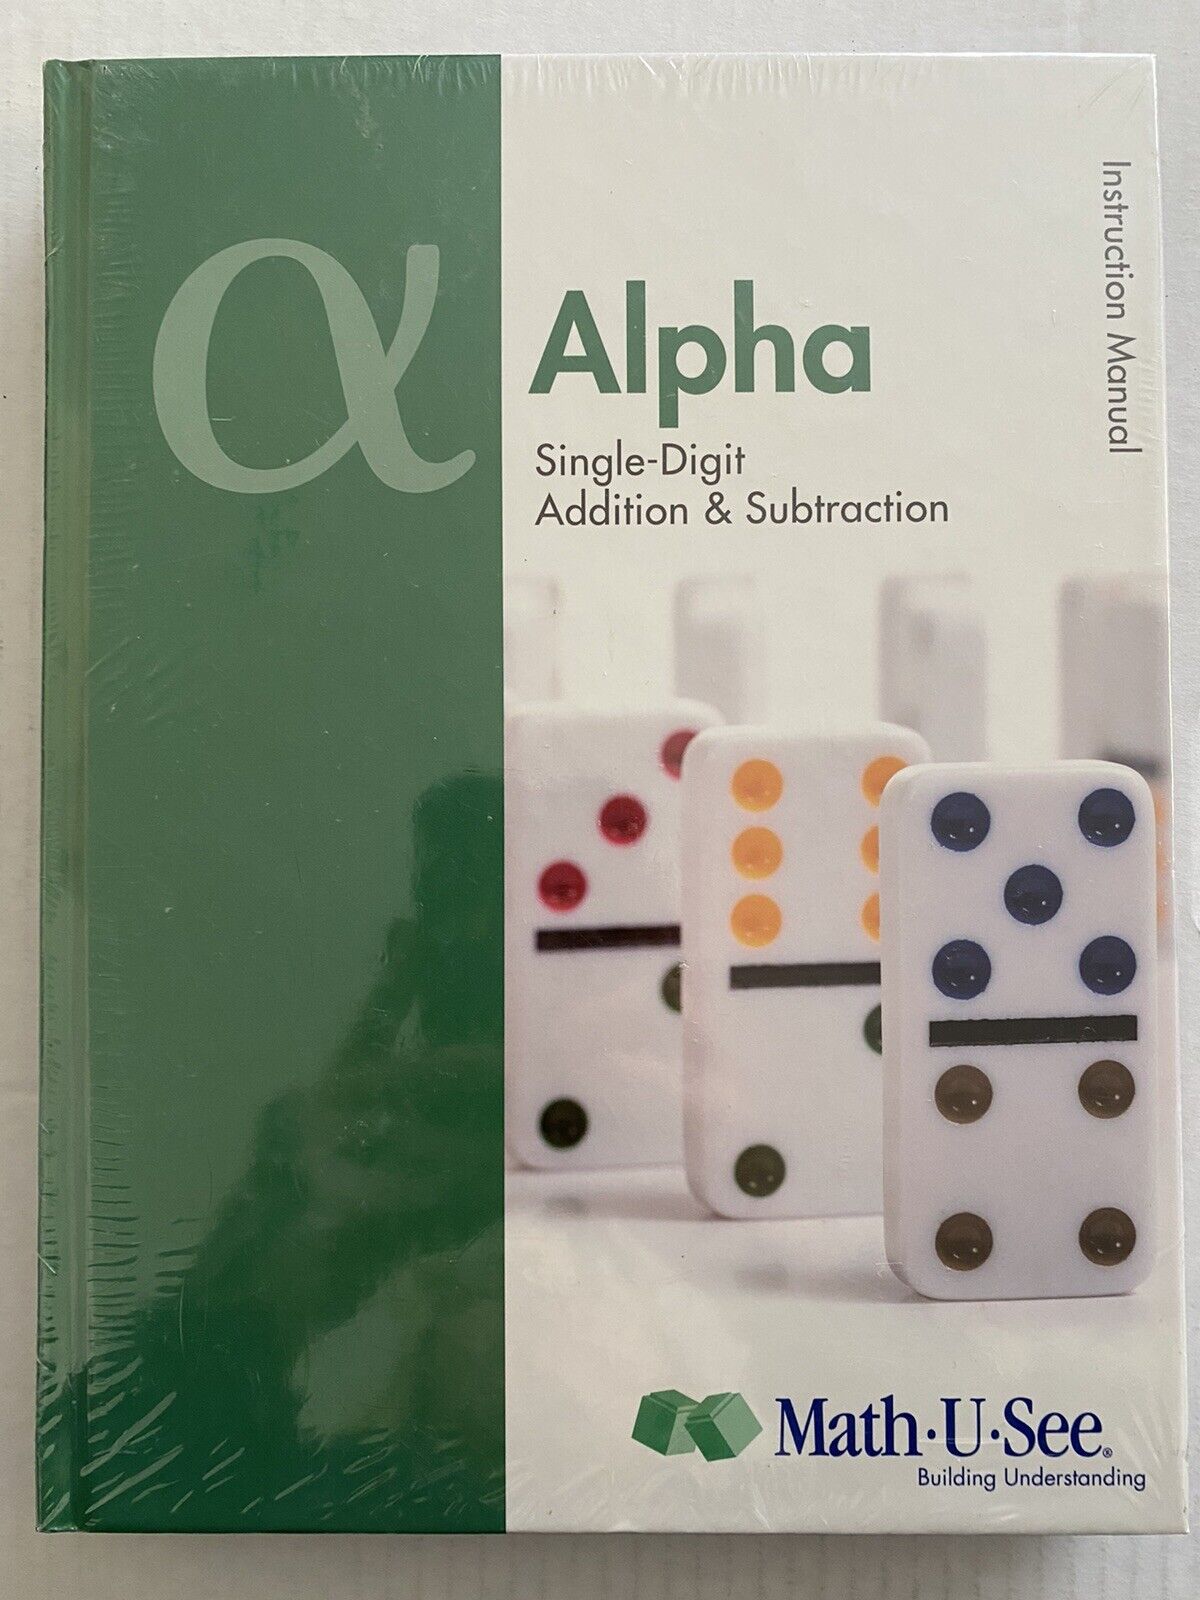 Alpha Single-Digit Addition and Subtraction Dvd - Math-U-See [DVD]